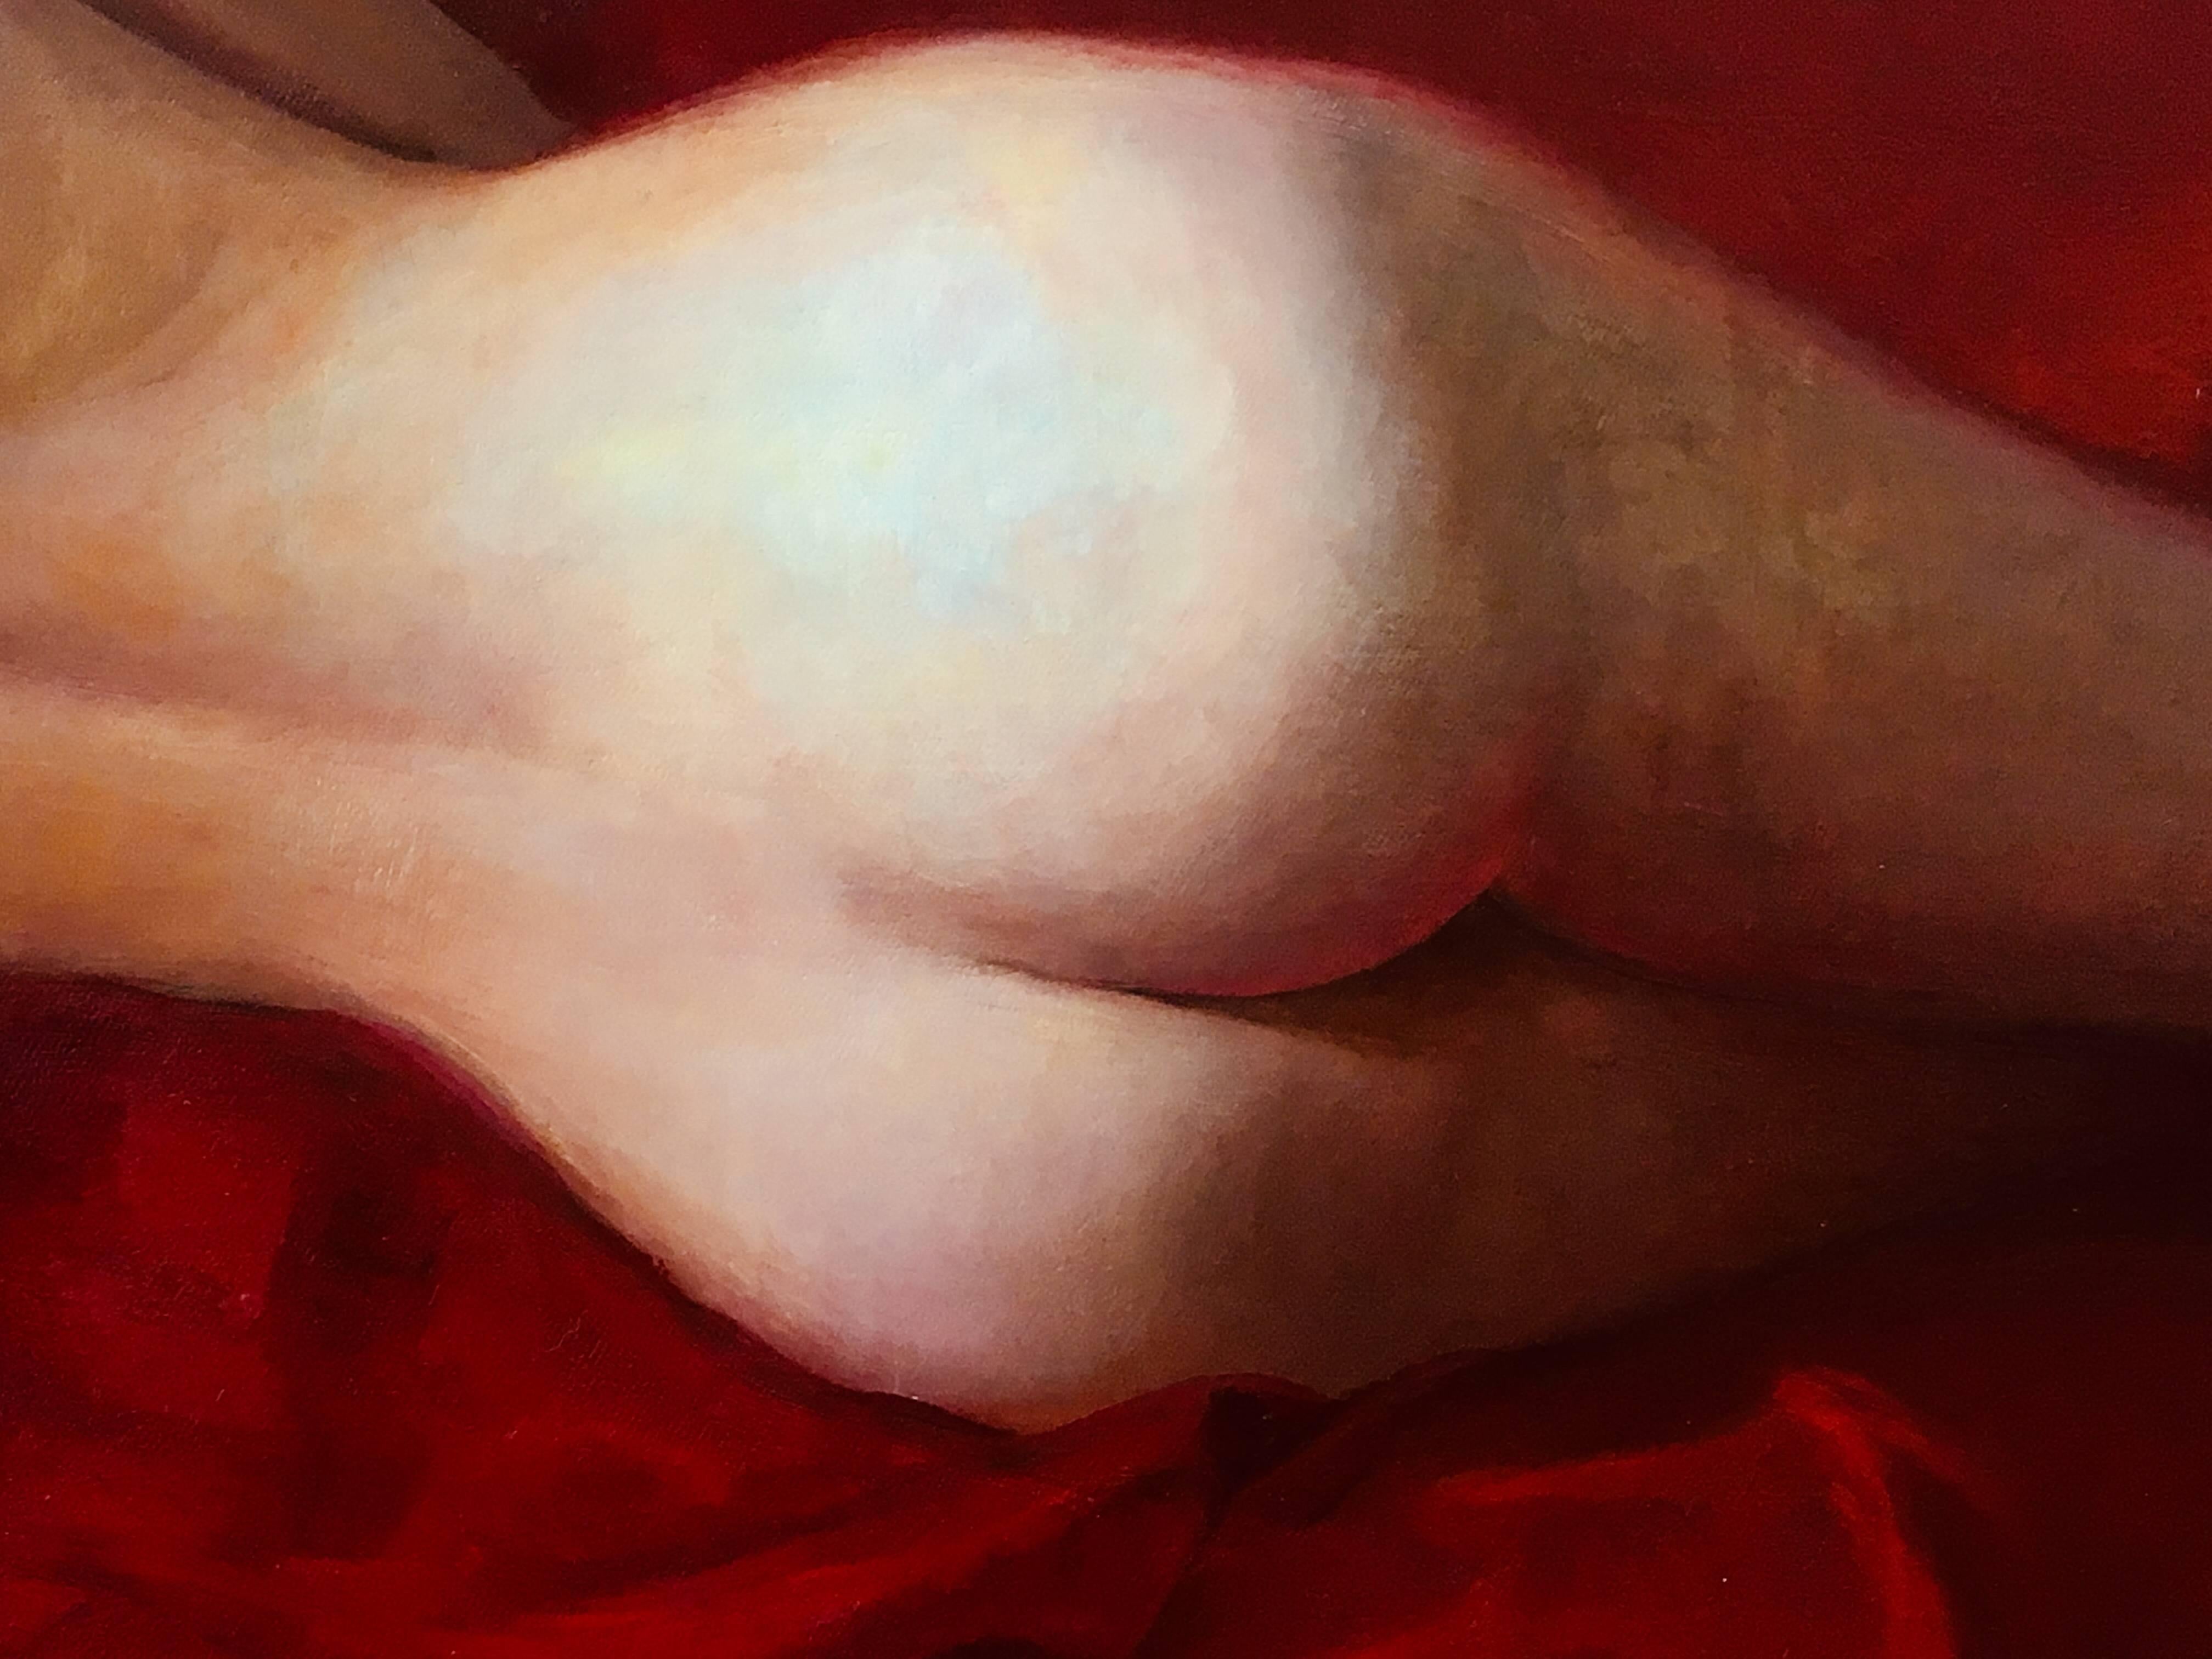 Striking dramatic female nude on a red sheet, from David Molesky who is an internationally recognized fine artist based in New York City known for his landscapes and figurative works. Red Lounge is part of the artist's Scout series. 

Molelsky has